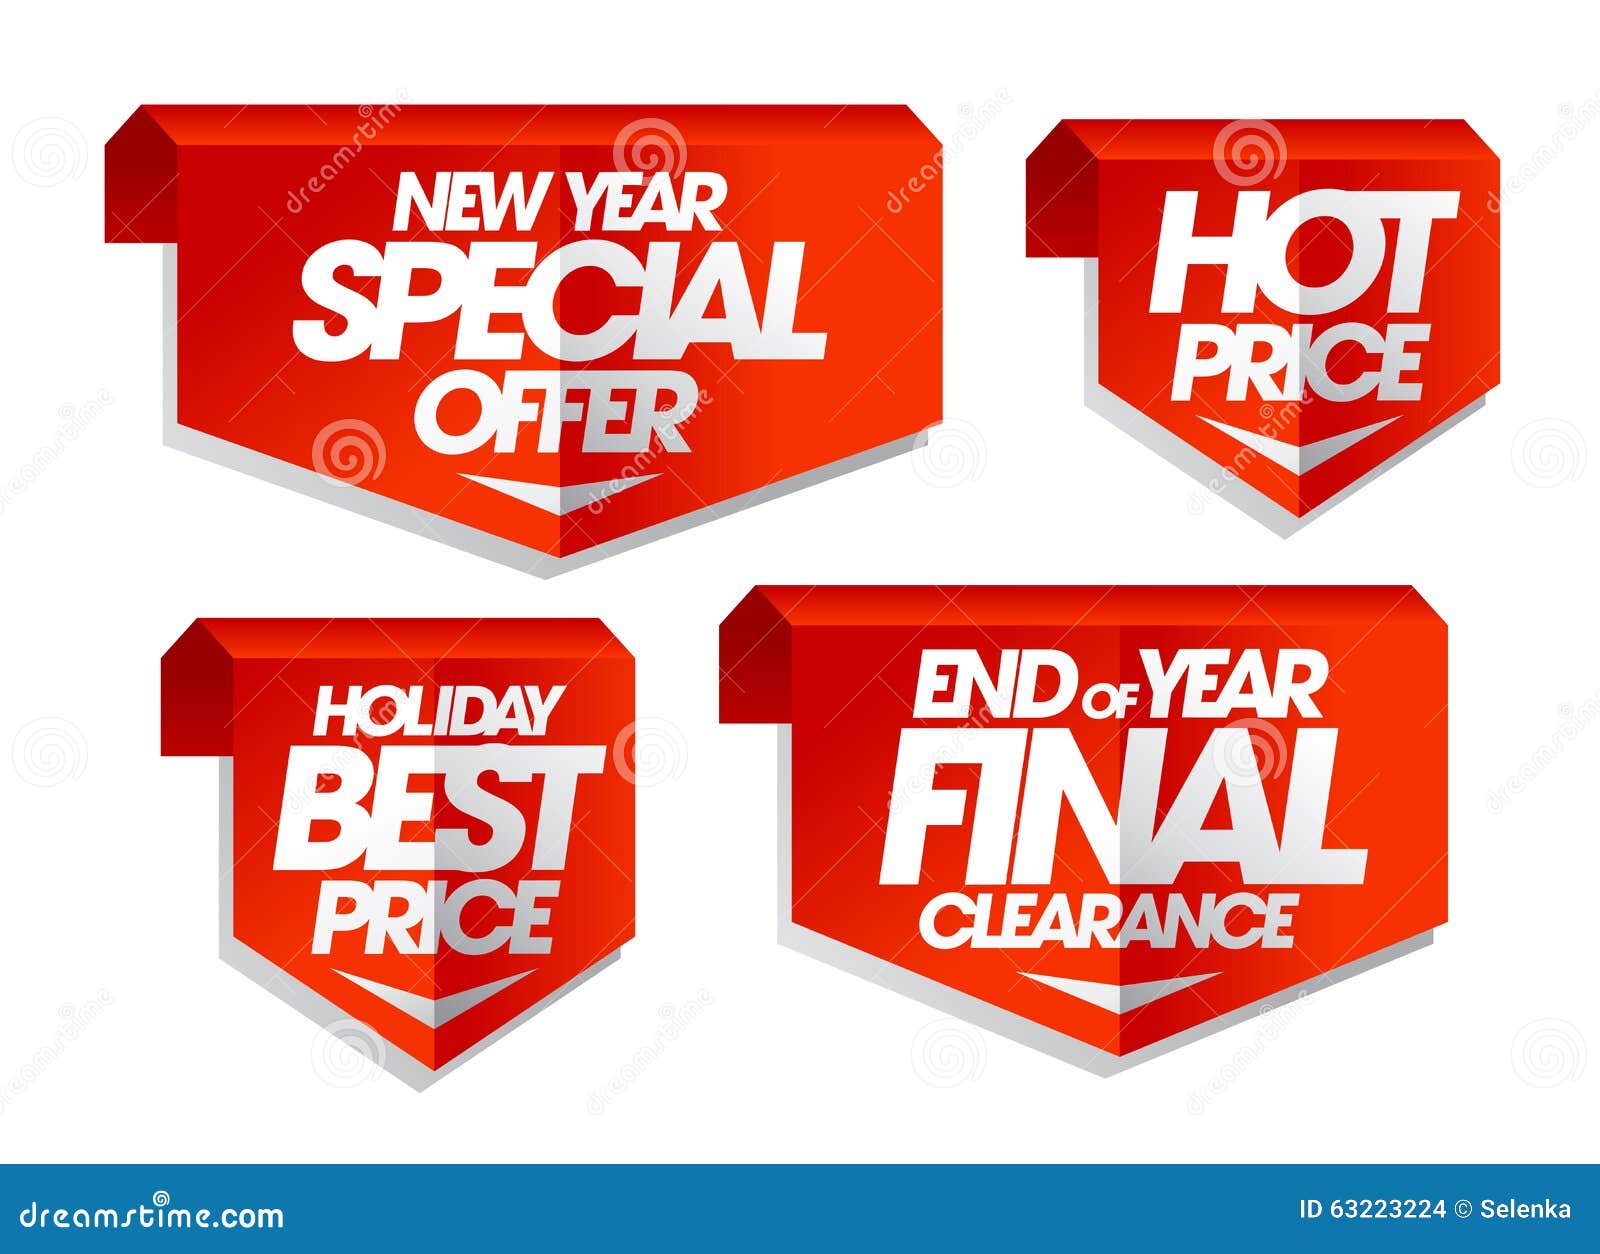 new-year-special-offer-hot-price-holiday-best-price-end-of-year